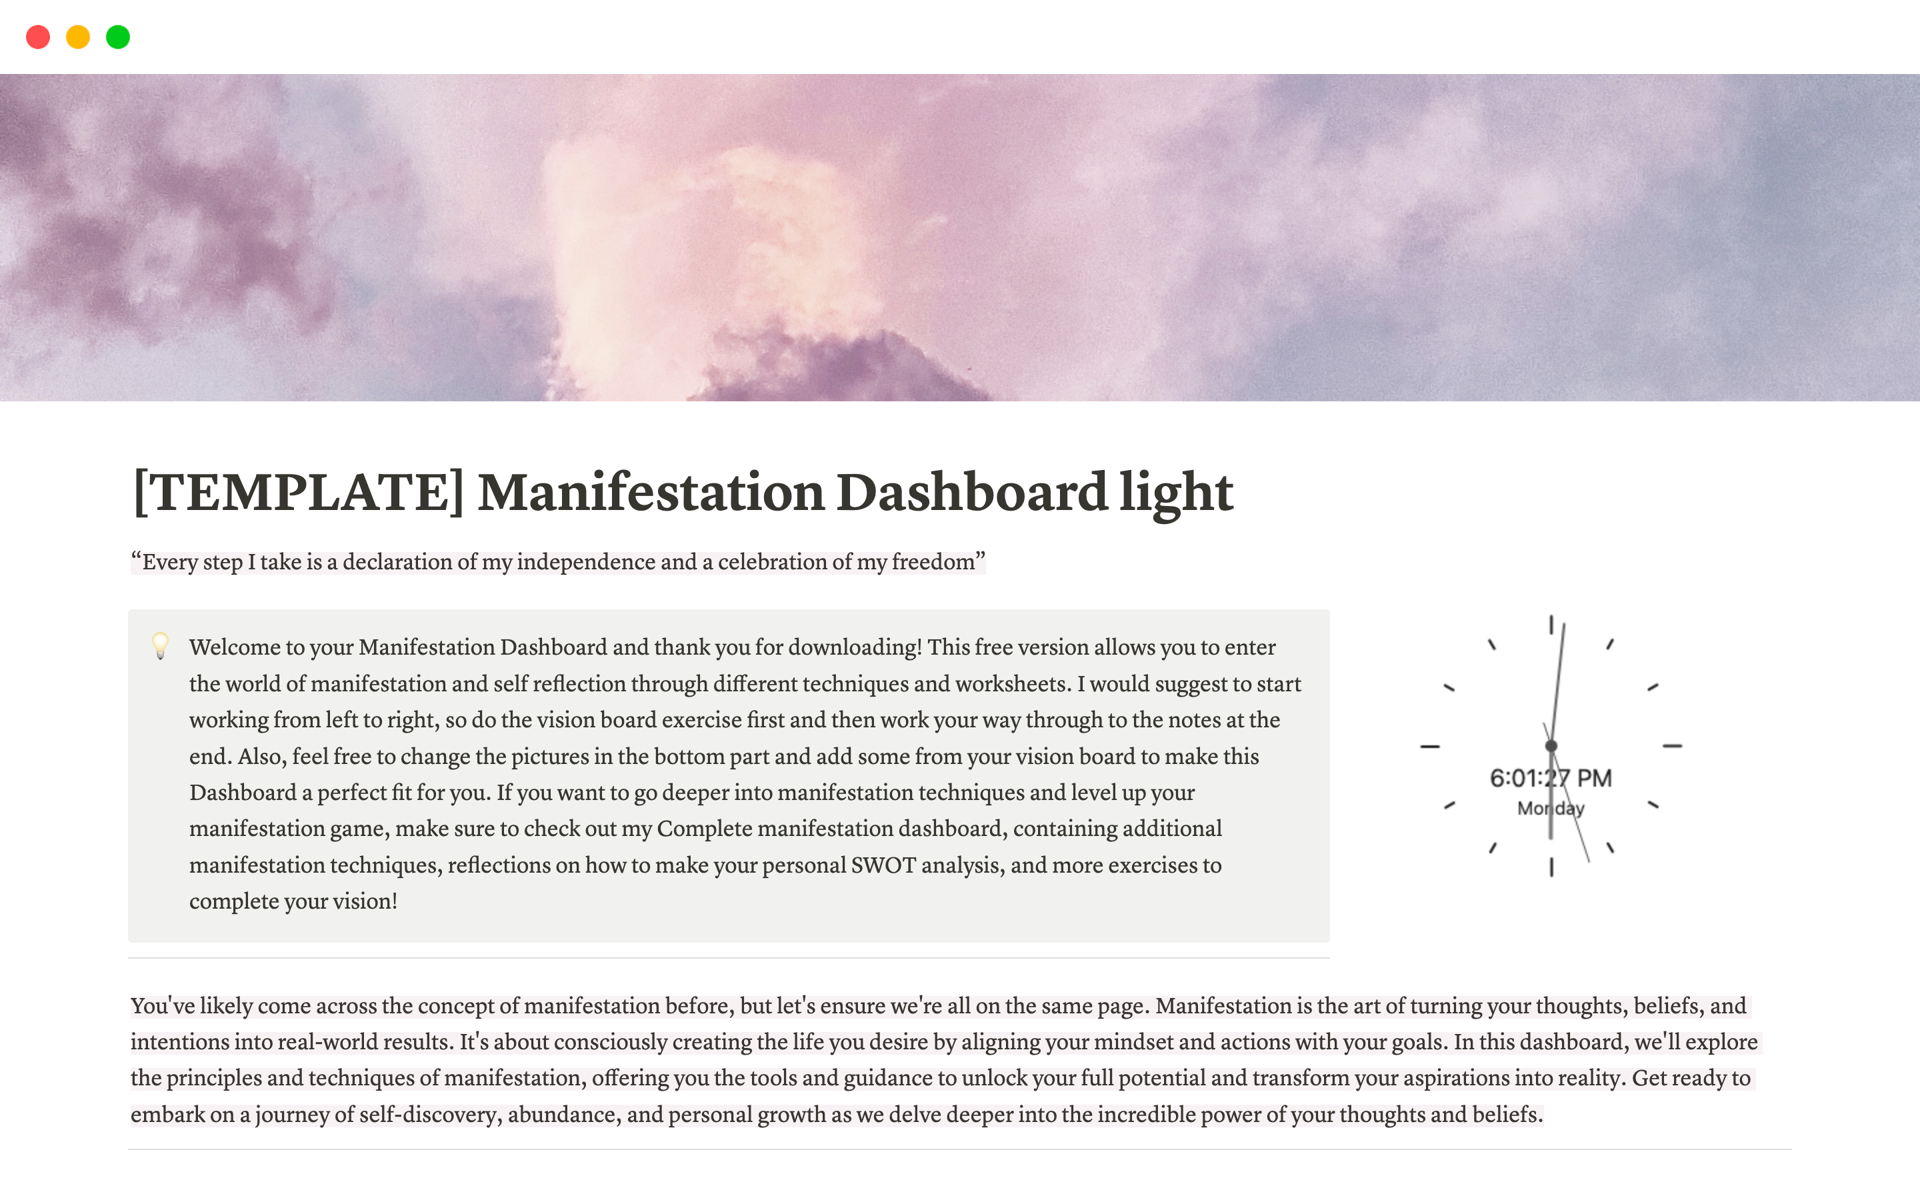 This manifestation dashboard introduces you to the world of manifestation through different exercises and worksheets 💎